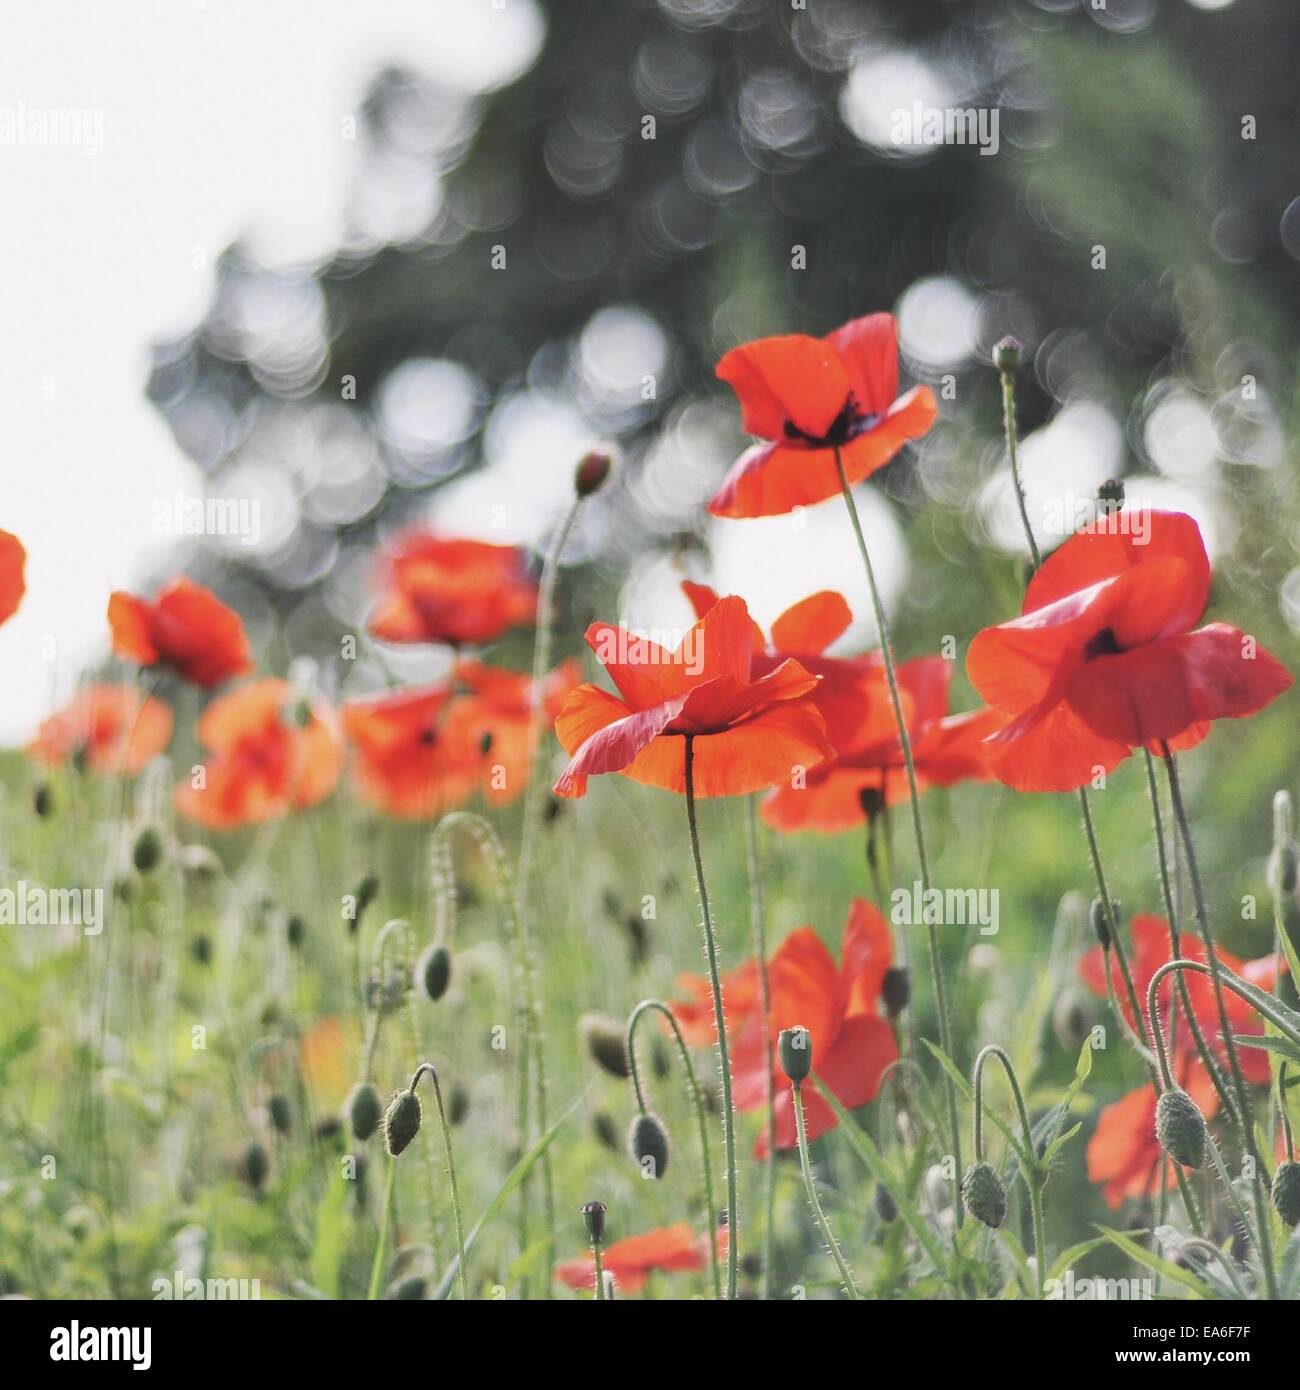 Red poppy flowers in a field, England, United Kingdom Stock Photo